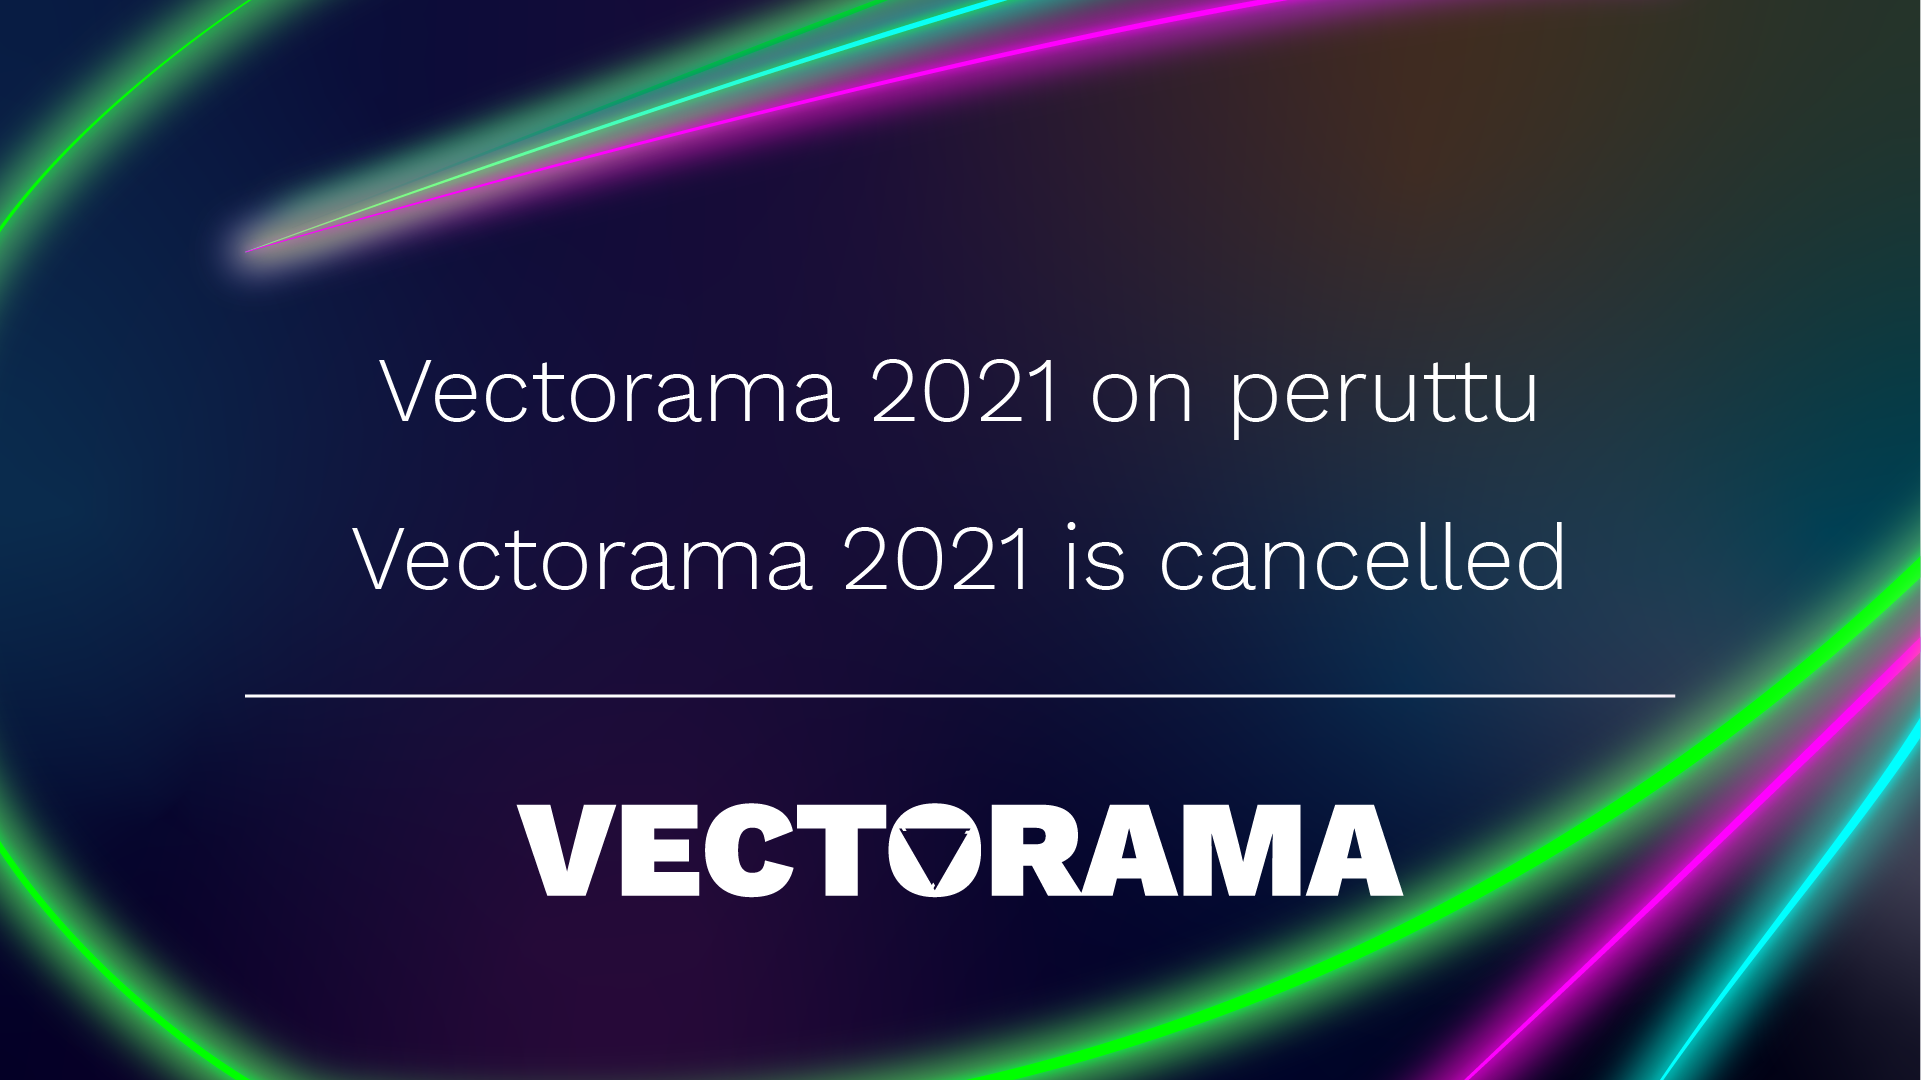 On a dark colourful background it says Vectorama 2021 is cancelled"